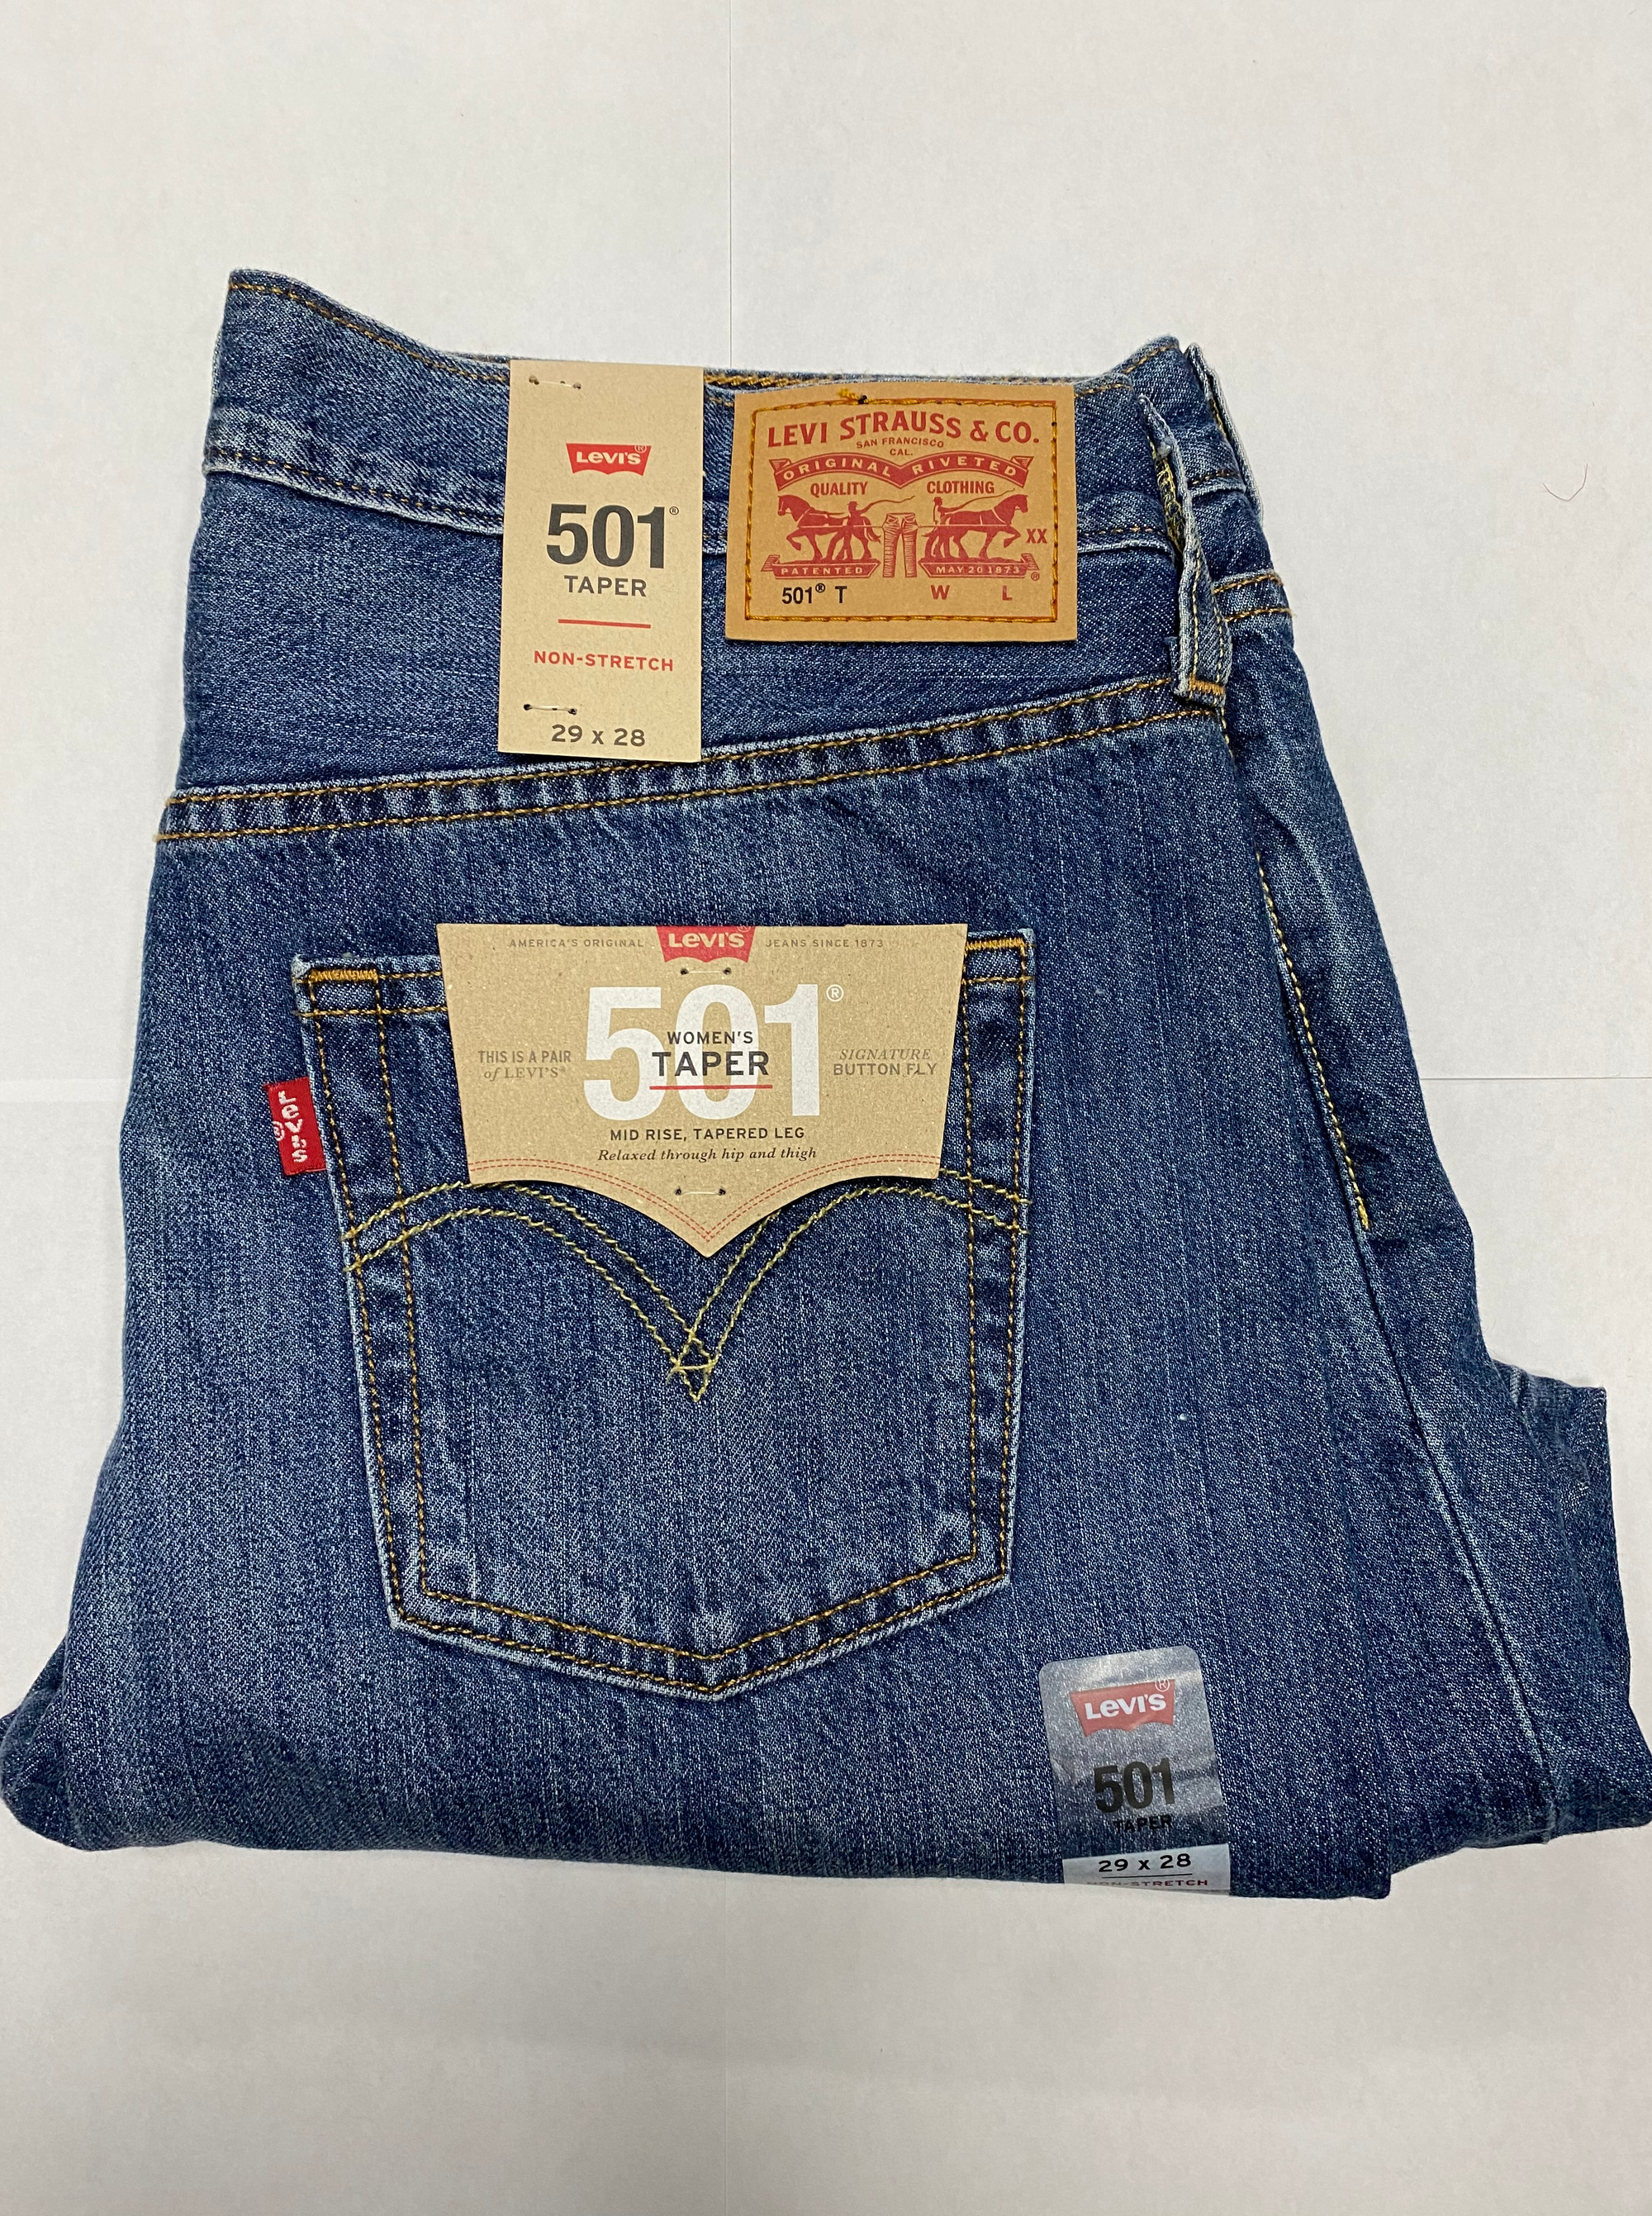 LEVIS 501® MID RISE TAPERED JEAN